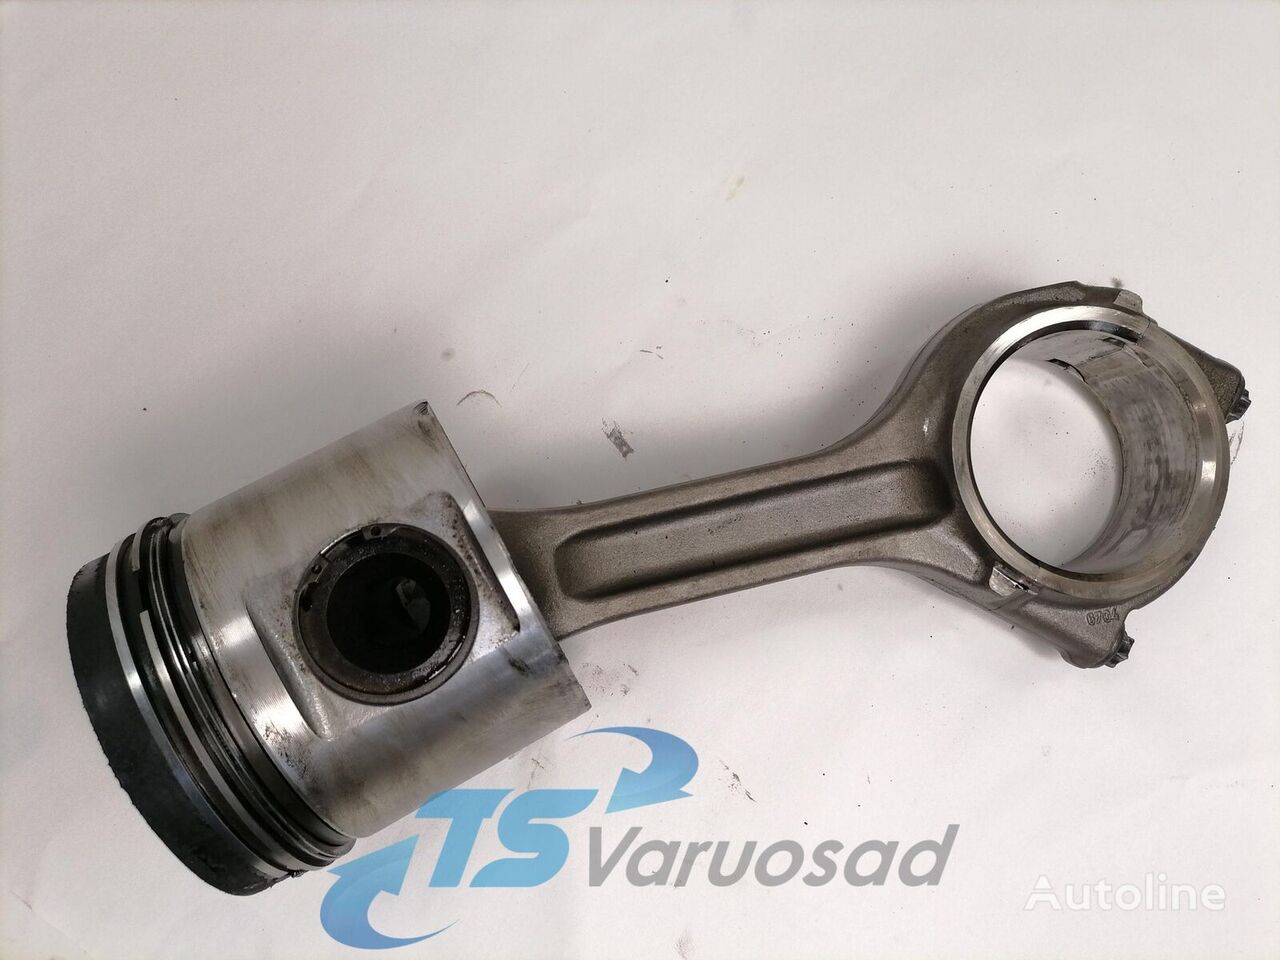 Scania Connecting rod + piston 1538036 for Scania R420 truck tractor